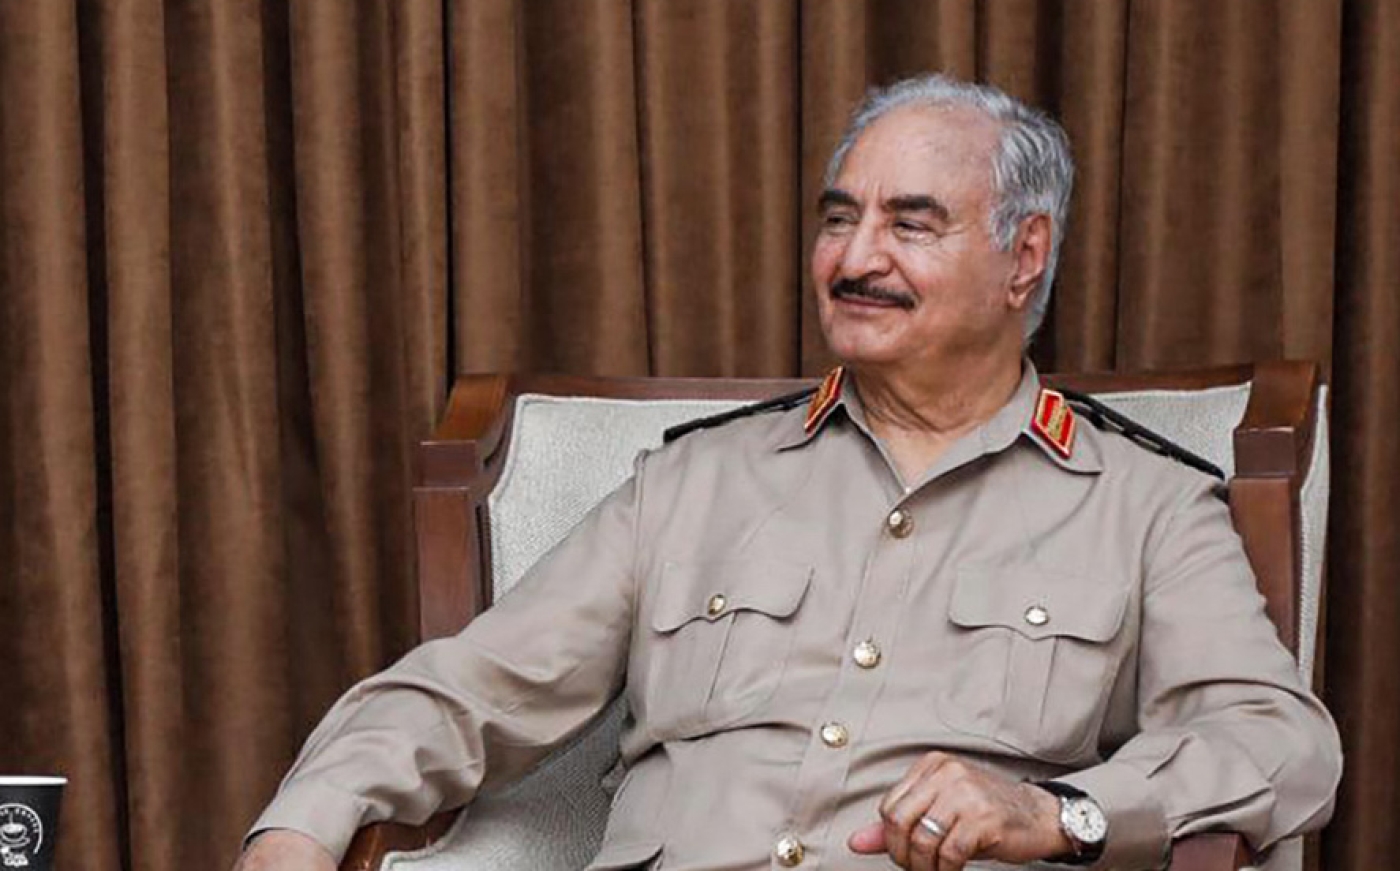 Haftar has embarked on a large-scale lobbying campaign aimed at regaining the influence he has lost.